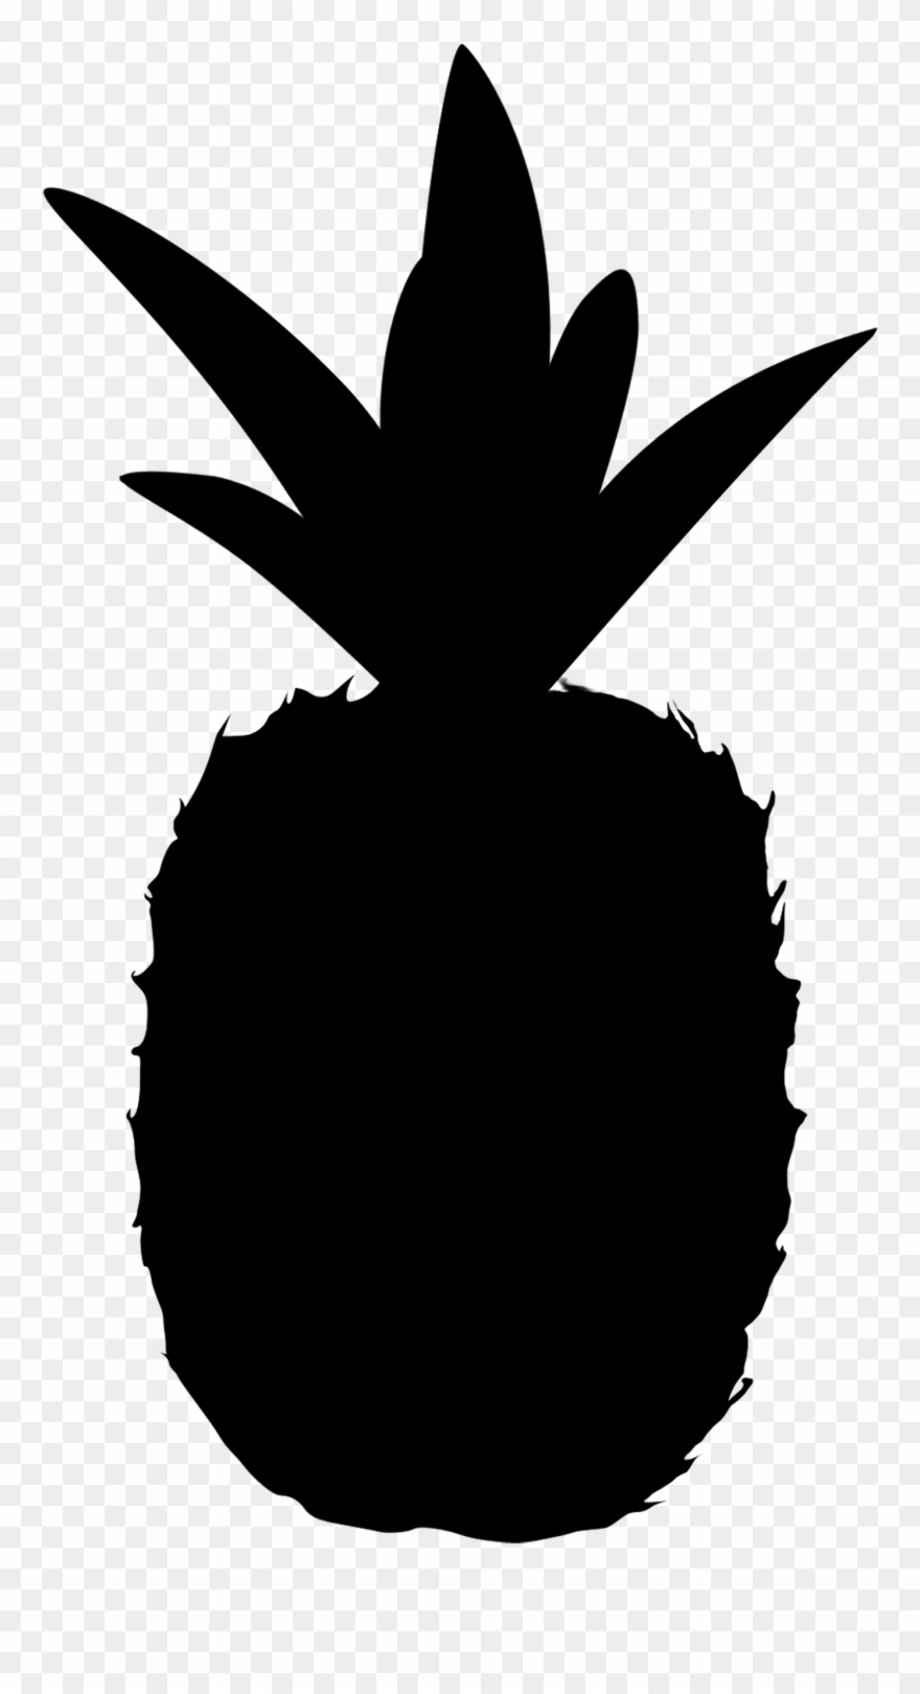 Download Download High Quality pineapple clipart silhouette ...